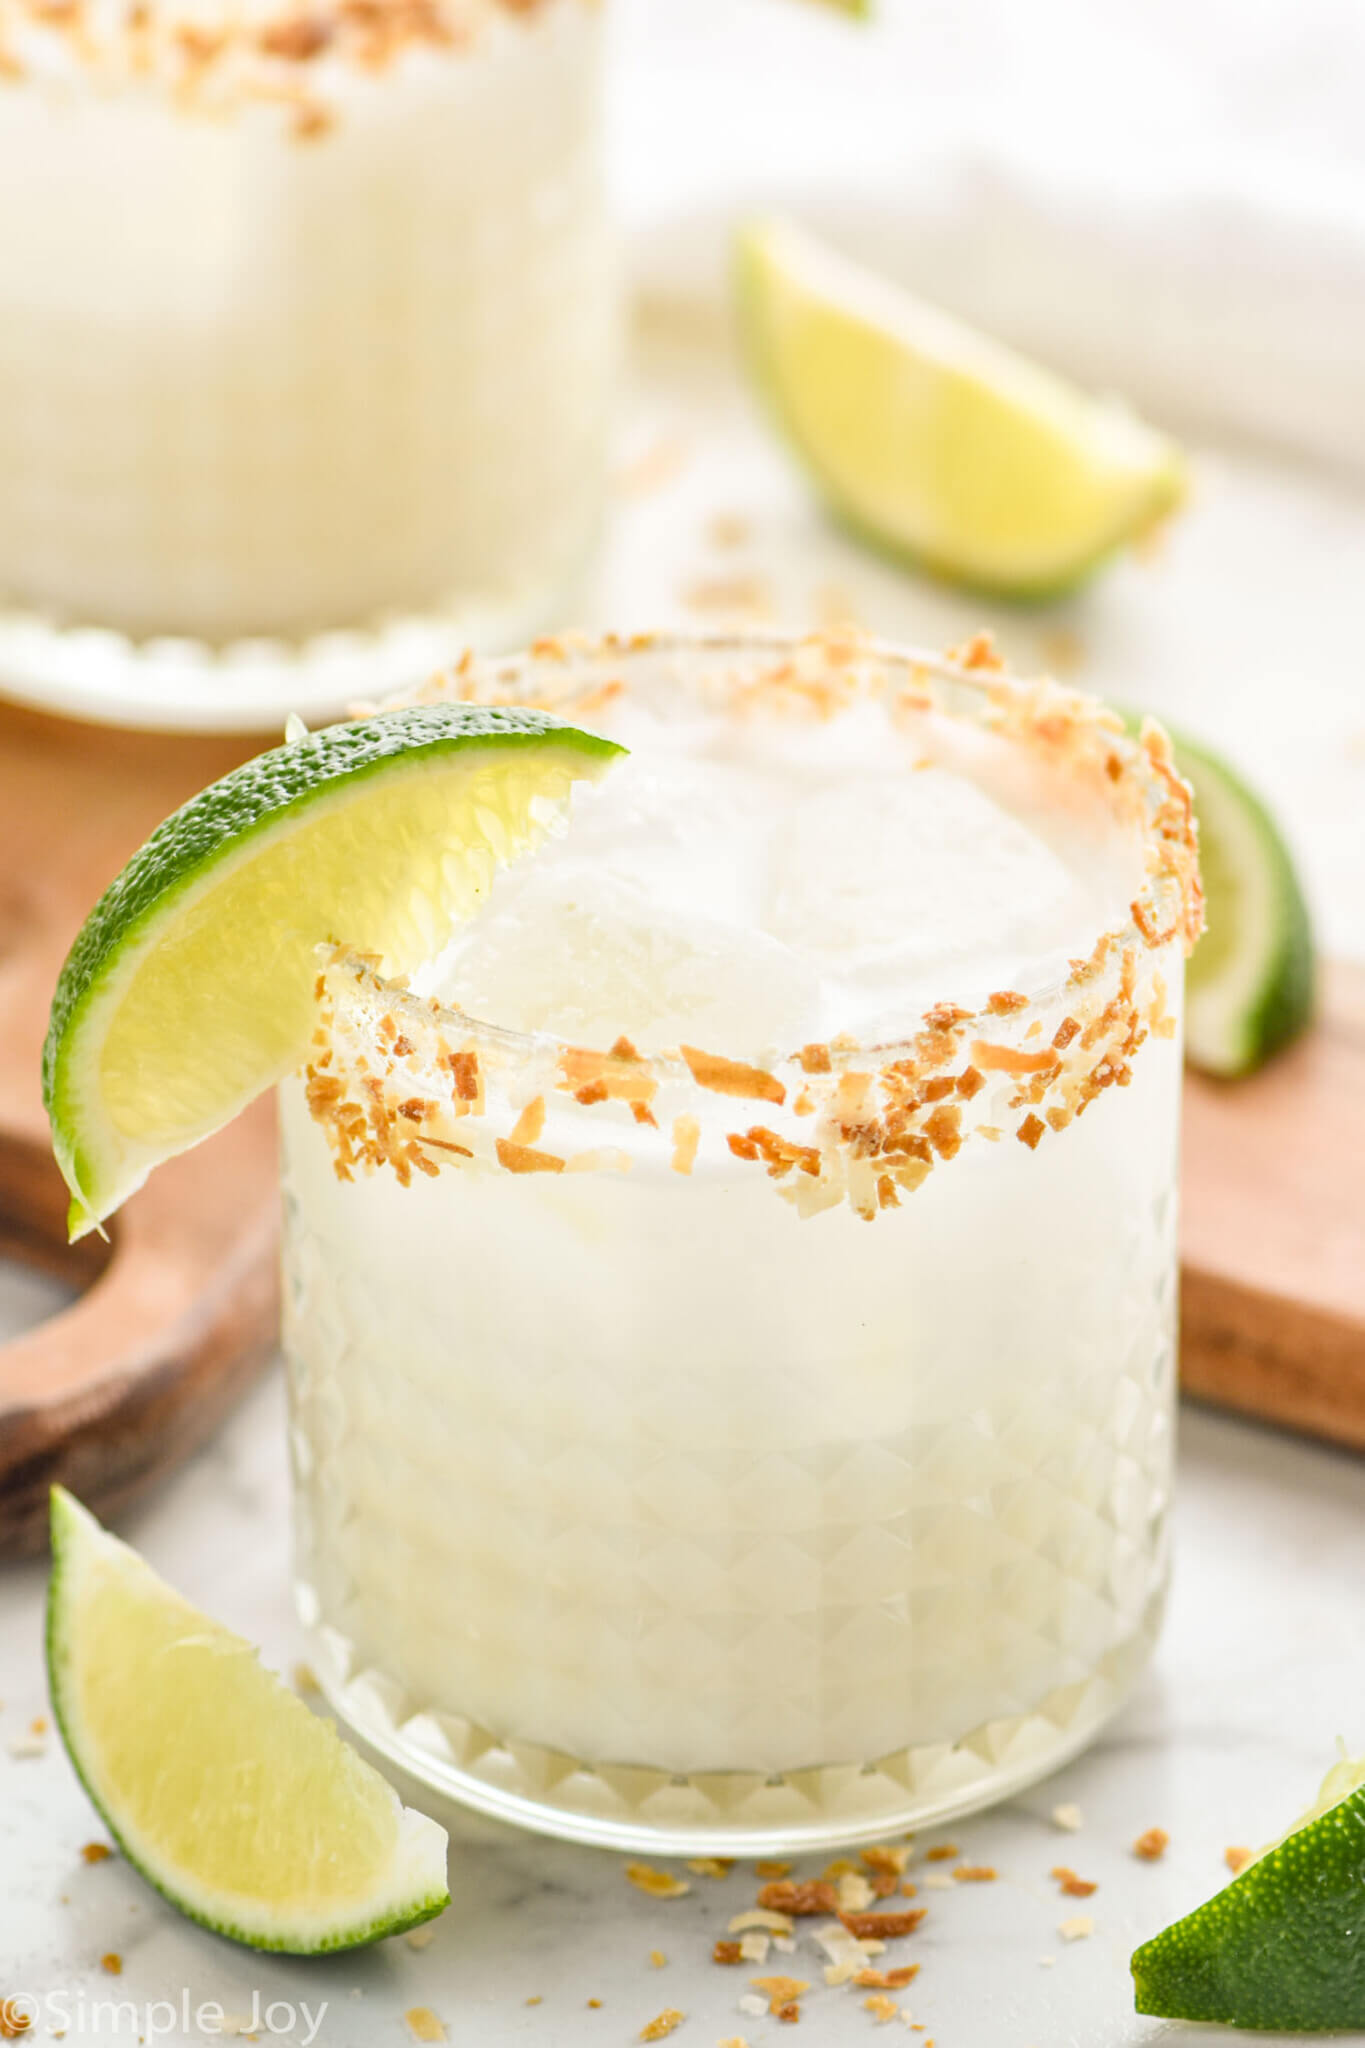 A margarita with lime wedge garnish and toasted coconut rim.